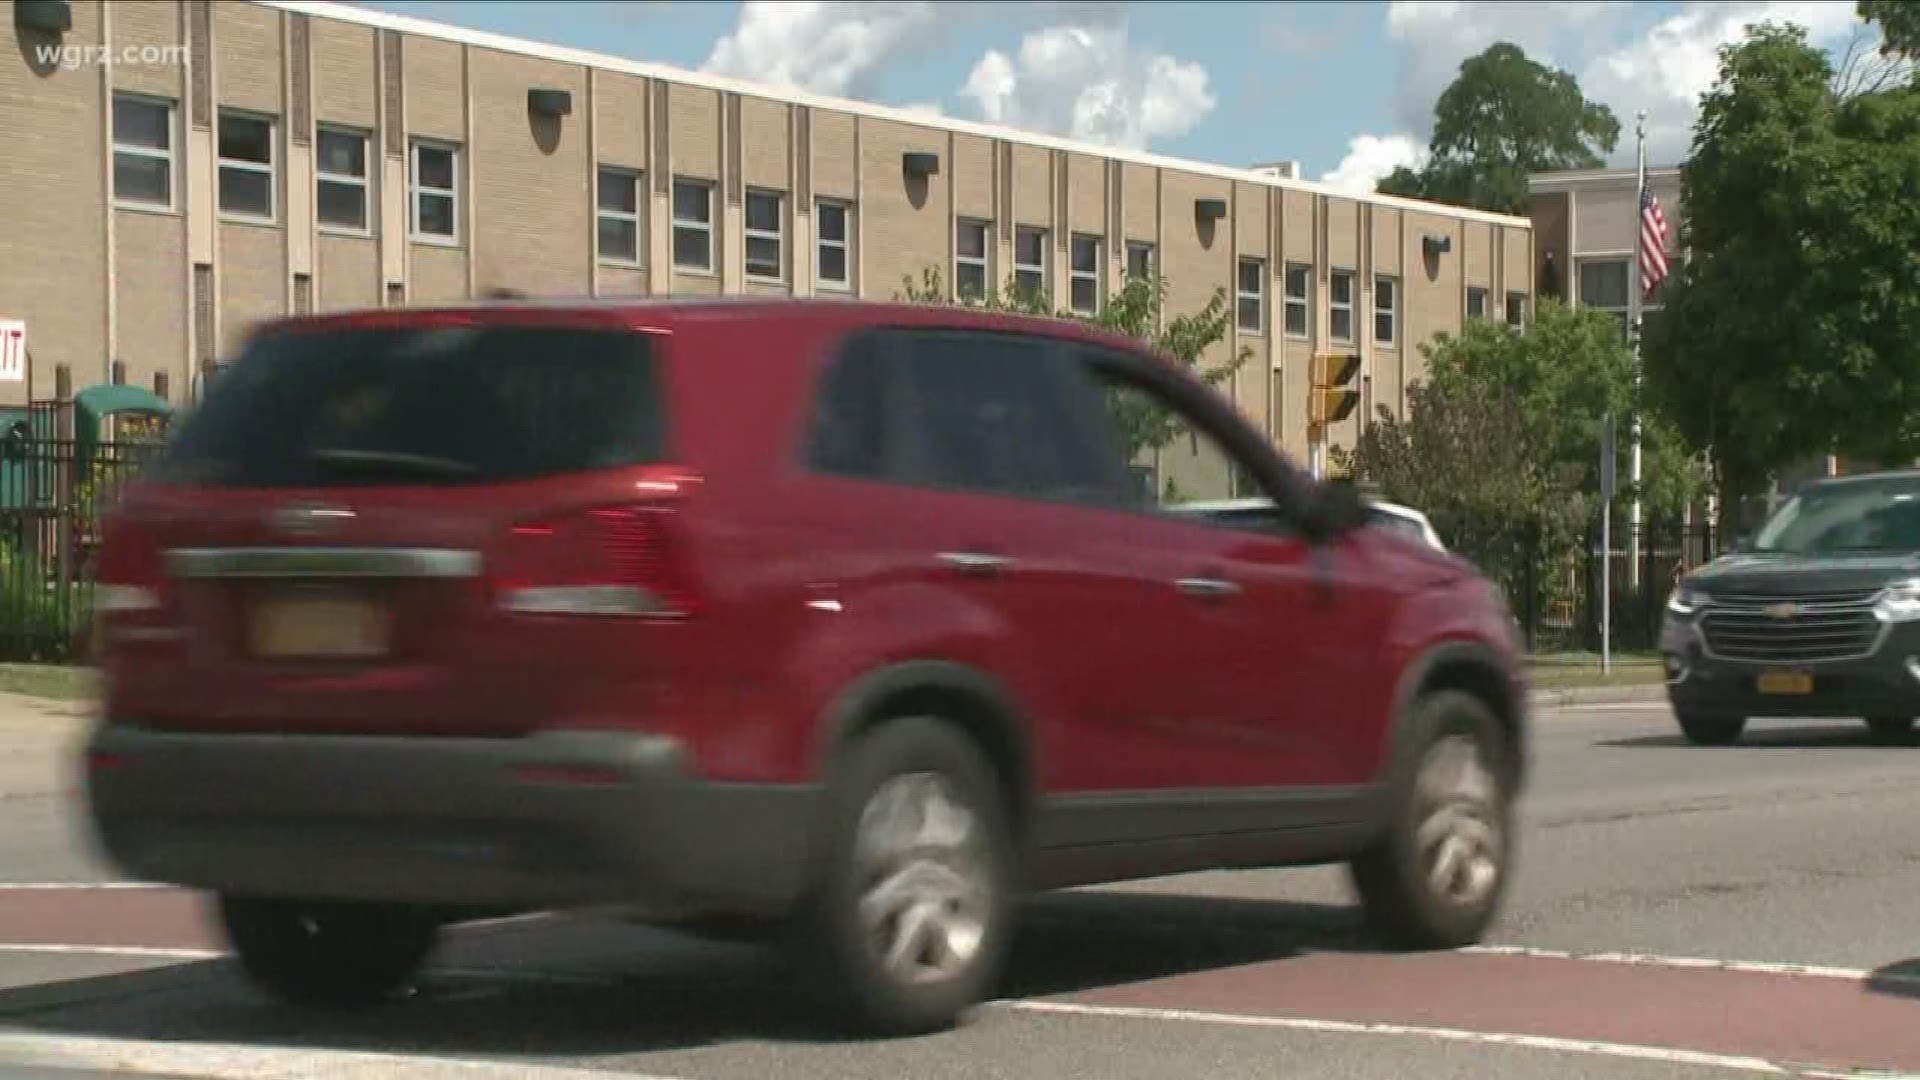 The city of Buffalo is now cracking down on violators of school zones.